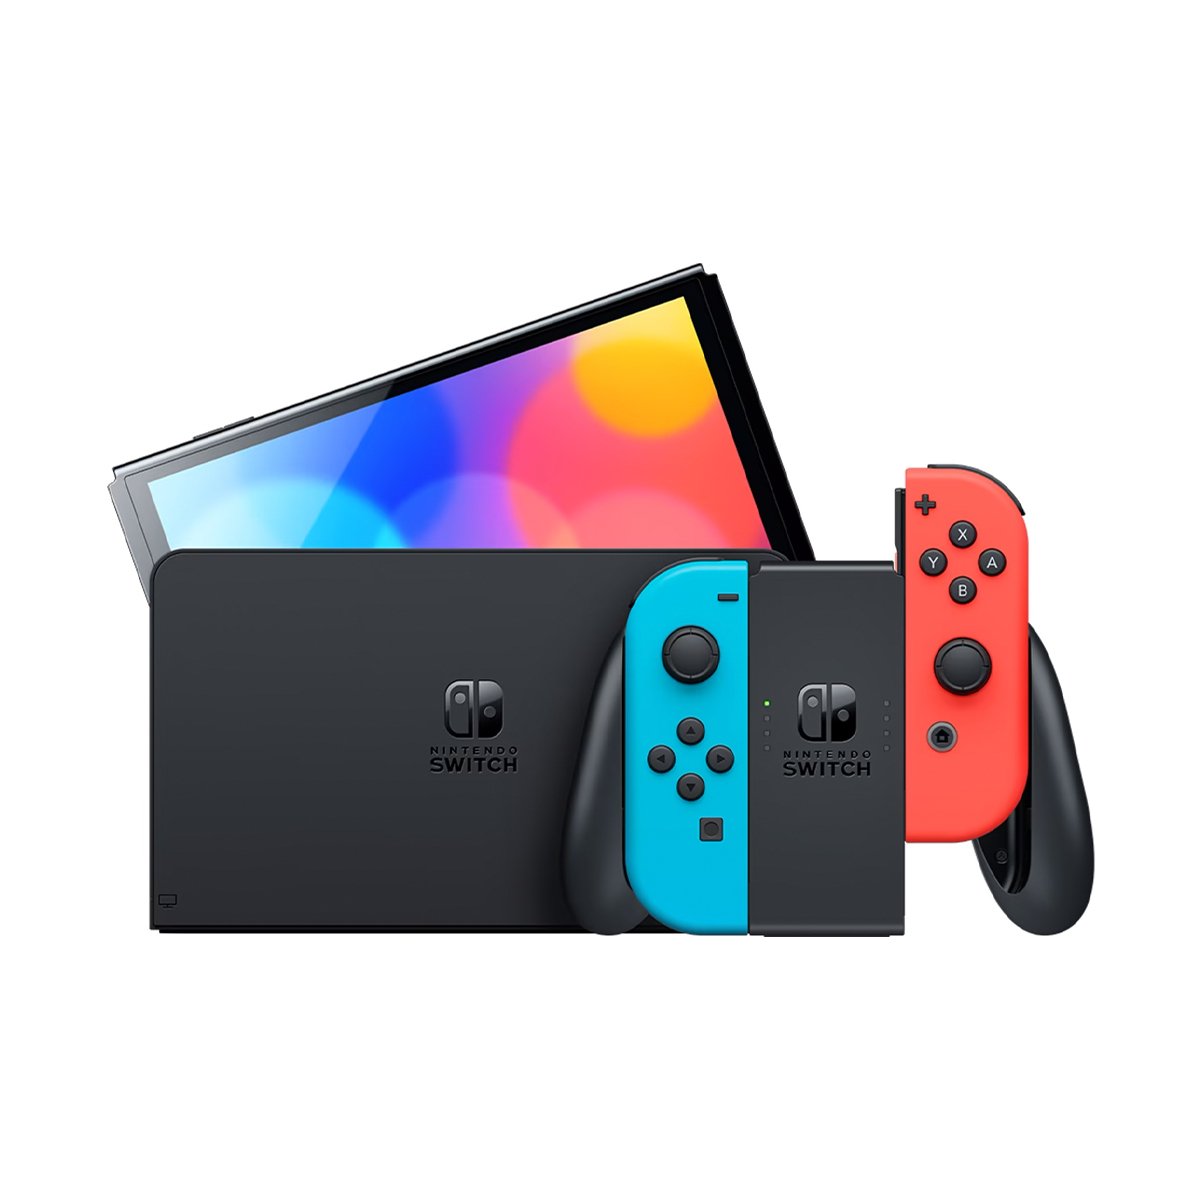 Nintendo Switch OLED Model -Neon Blue/Neon Red + 3 Games Pack. Deadly premonition + the princess Guide + demonex.